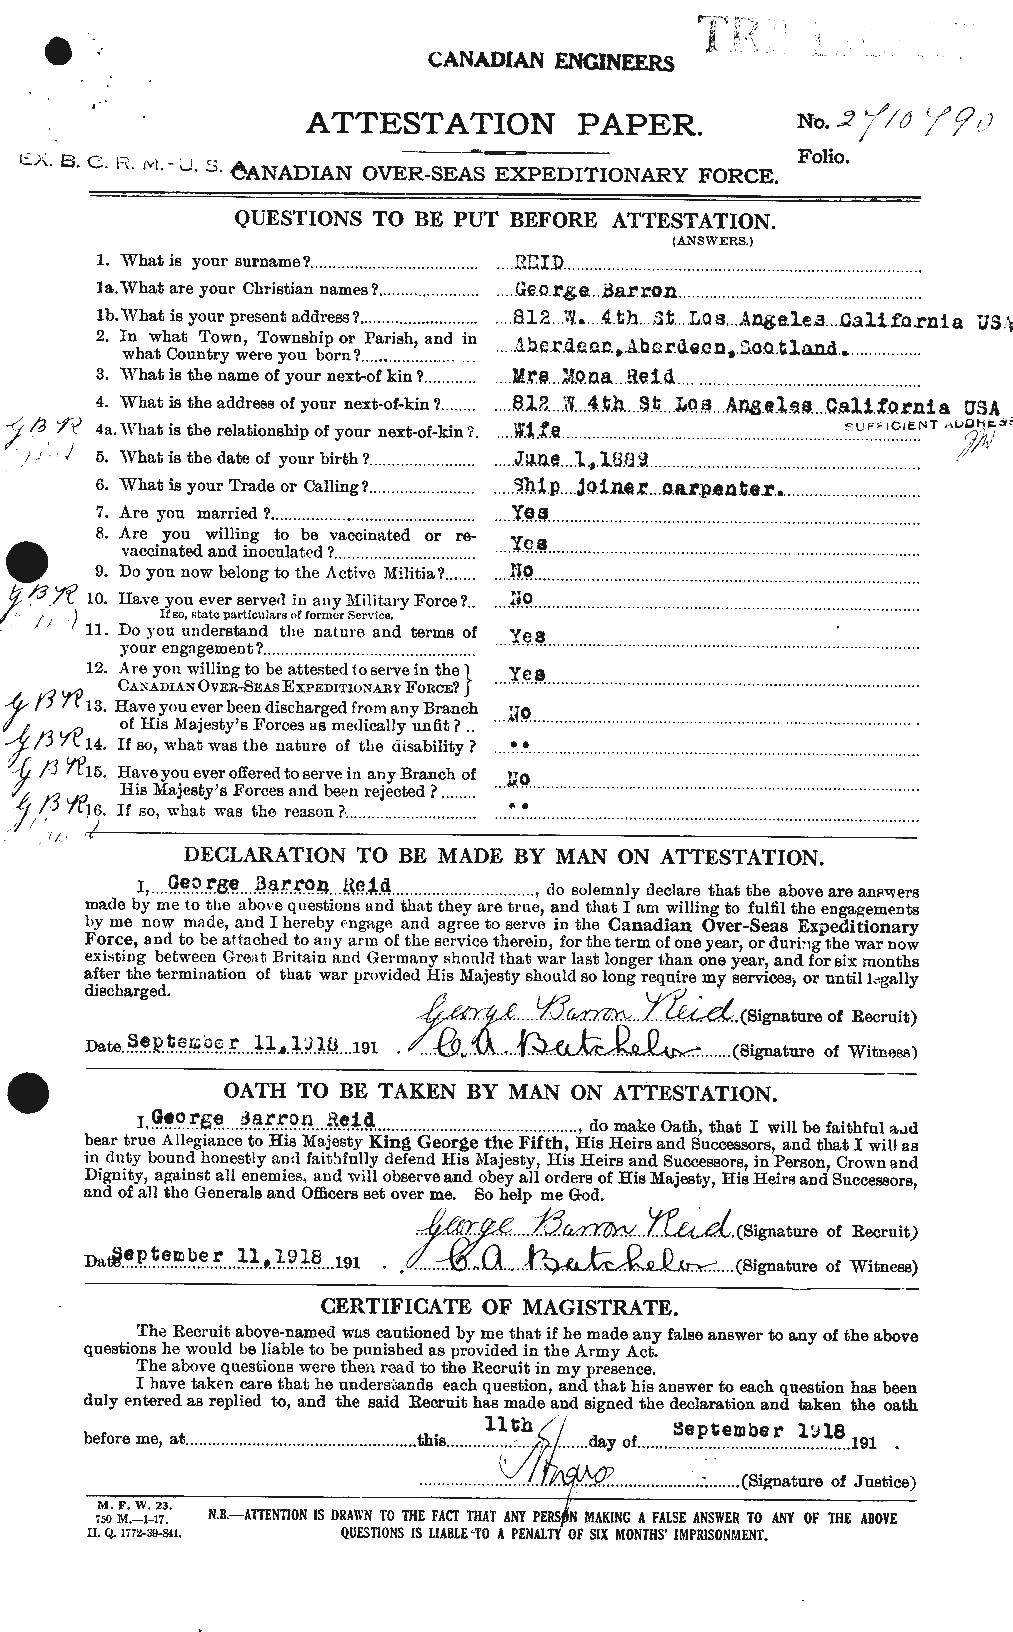 Personnel Records of the First World War - CEF 596286a